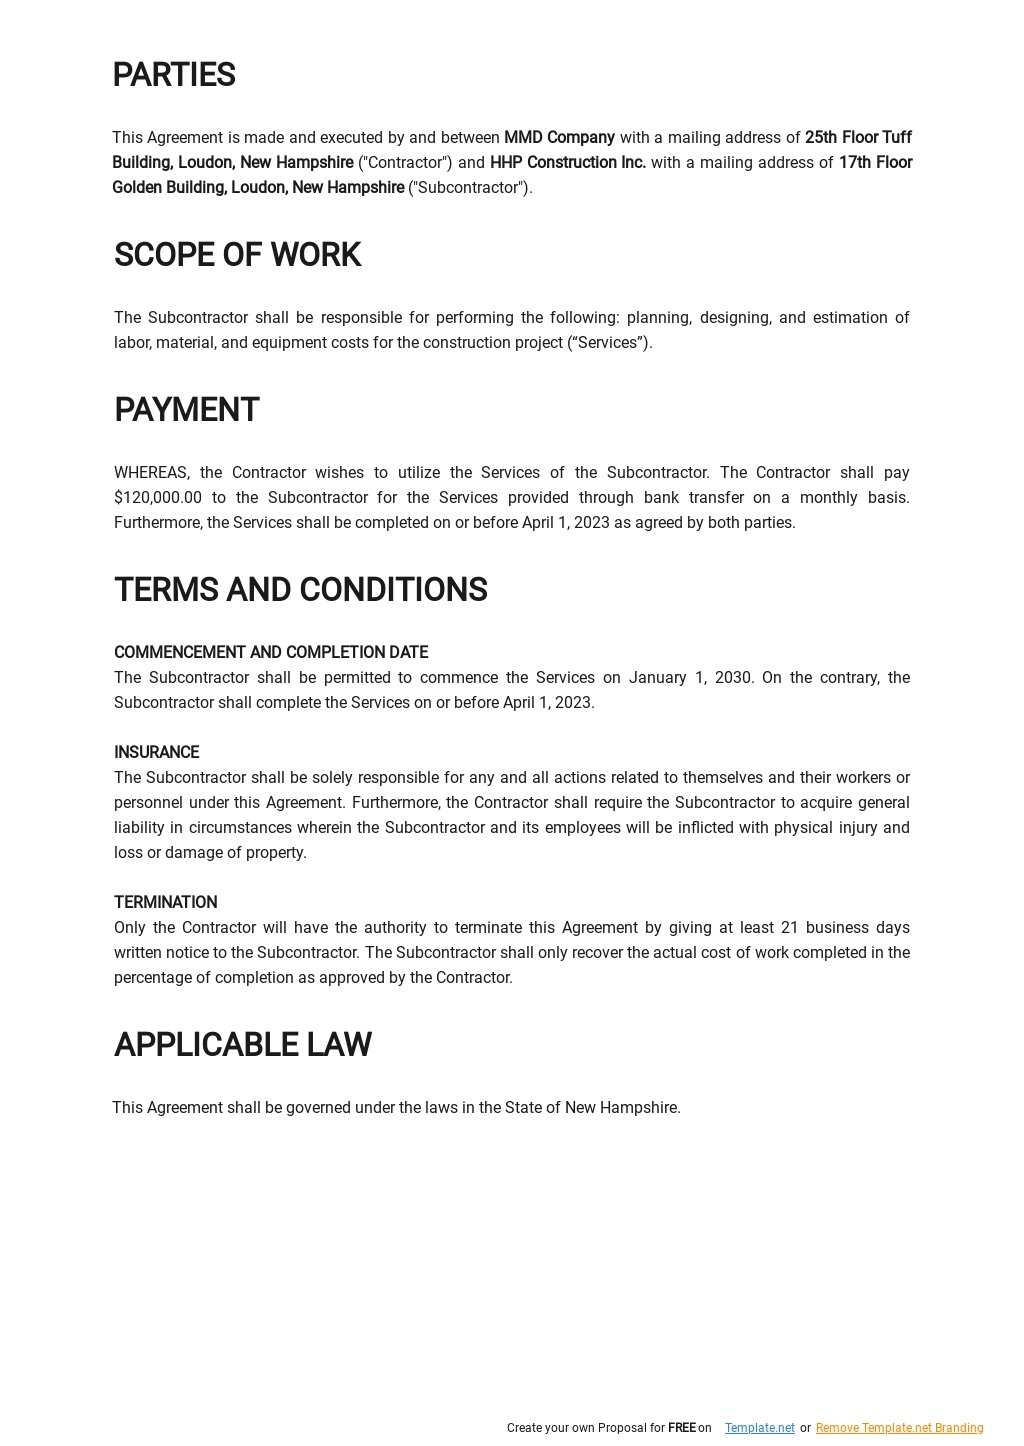 Construction Subcontractor Agreement Template 1.jpe